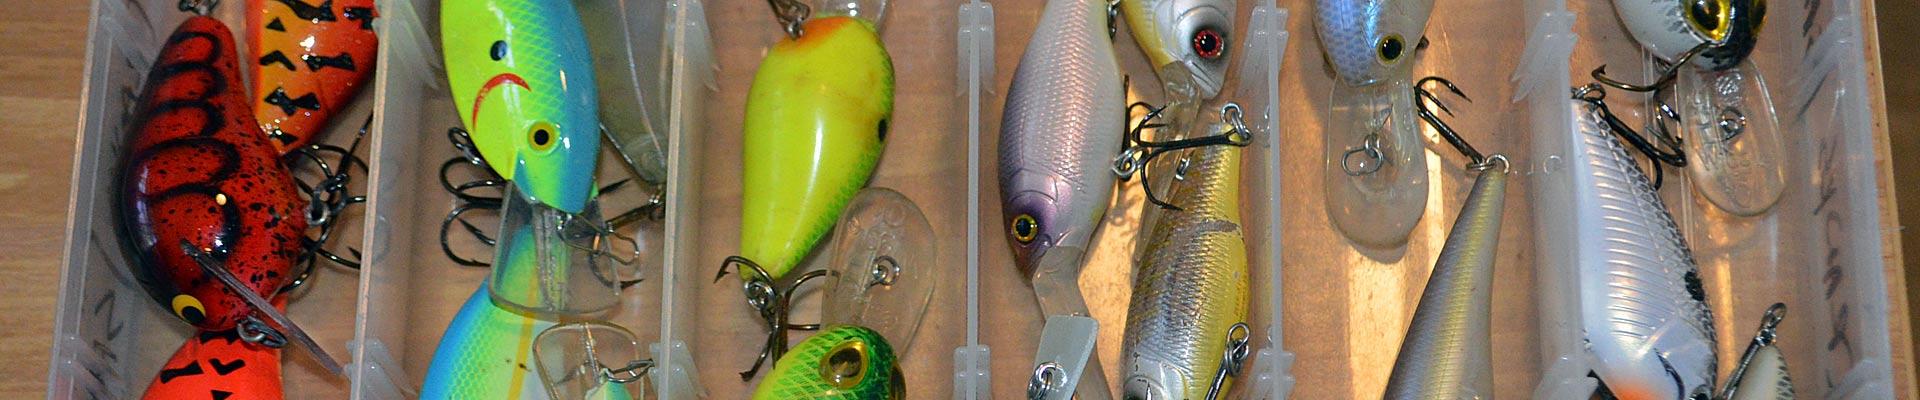 Mixed Lot of 2 Square Lip Plastic Crankbait Fishing Lures, Unbranded